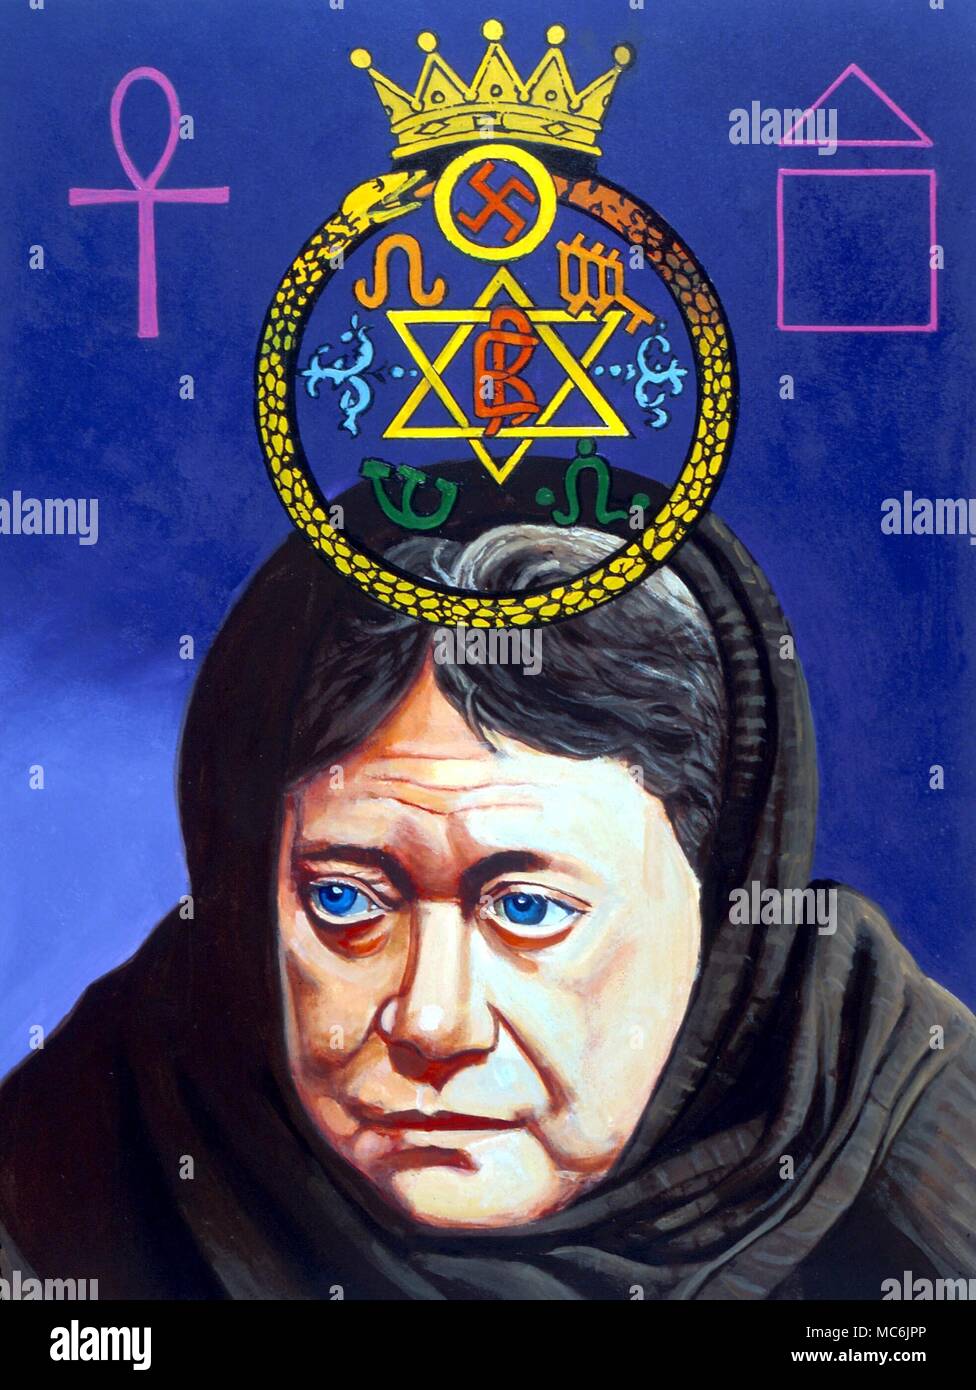 OCCULTISTS - BLAVATSKY. Portrait of Helena Petrovna Blavatsky (1831-1891), the founder of the Theosophical Society, and one of the greatest exponents of occultism of the 19th century. Stock Photo